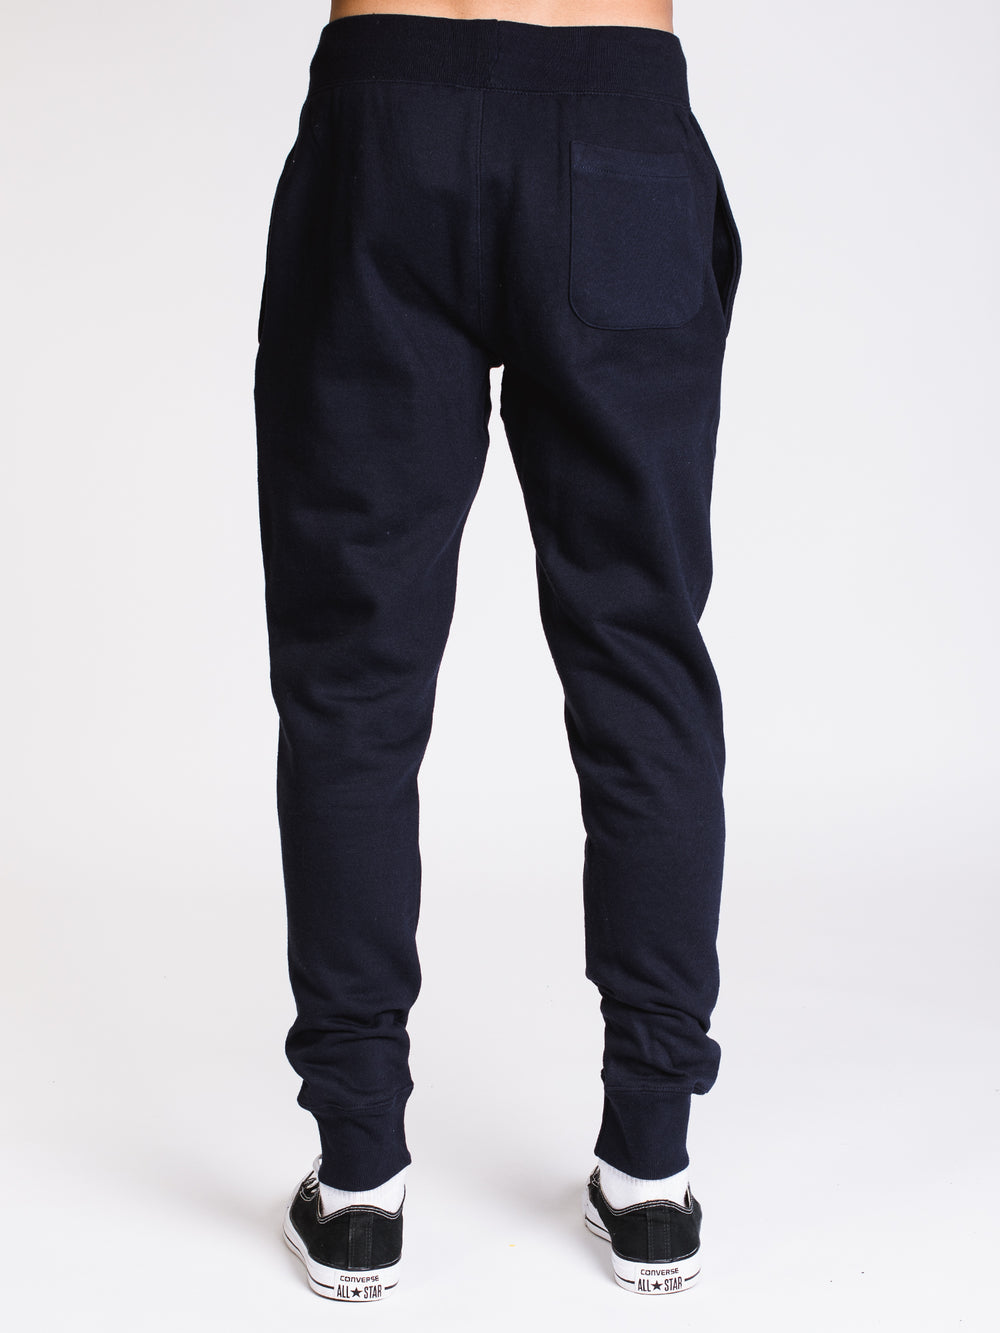 MENS REV WEAVE JOGGER PANT - NAVY - CLEARANCE